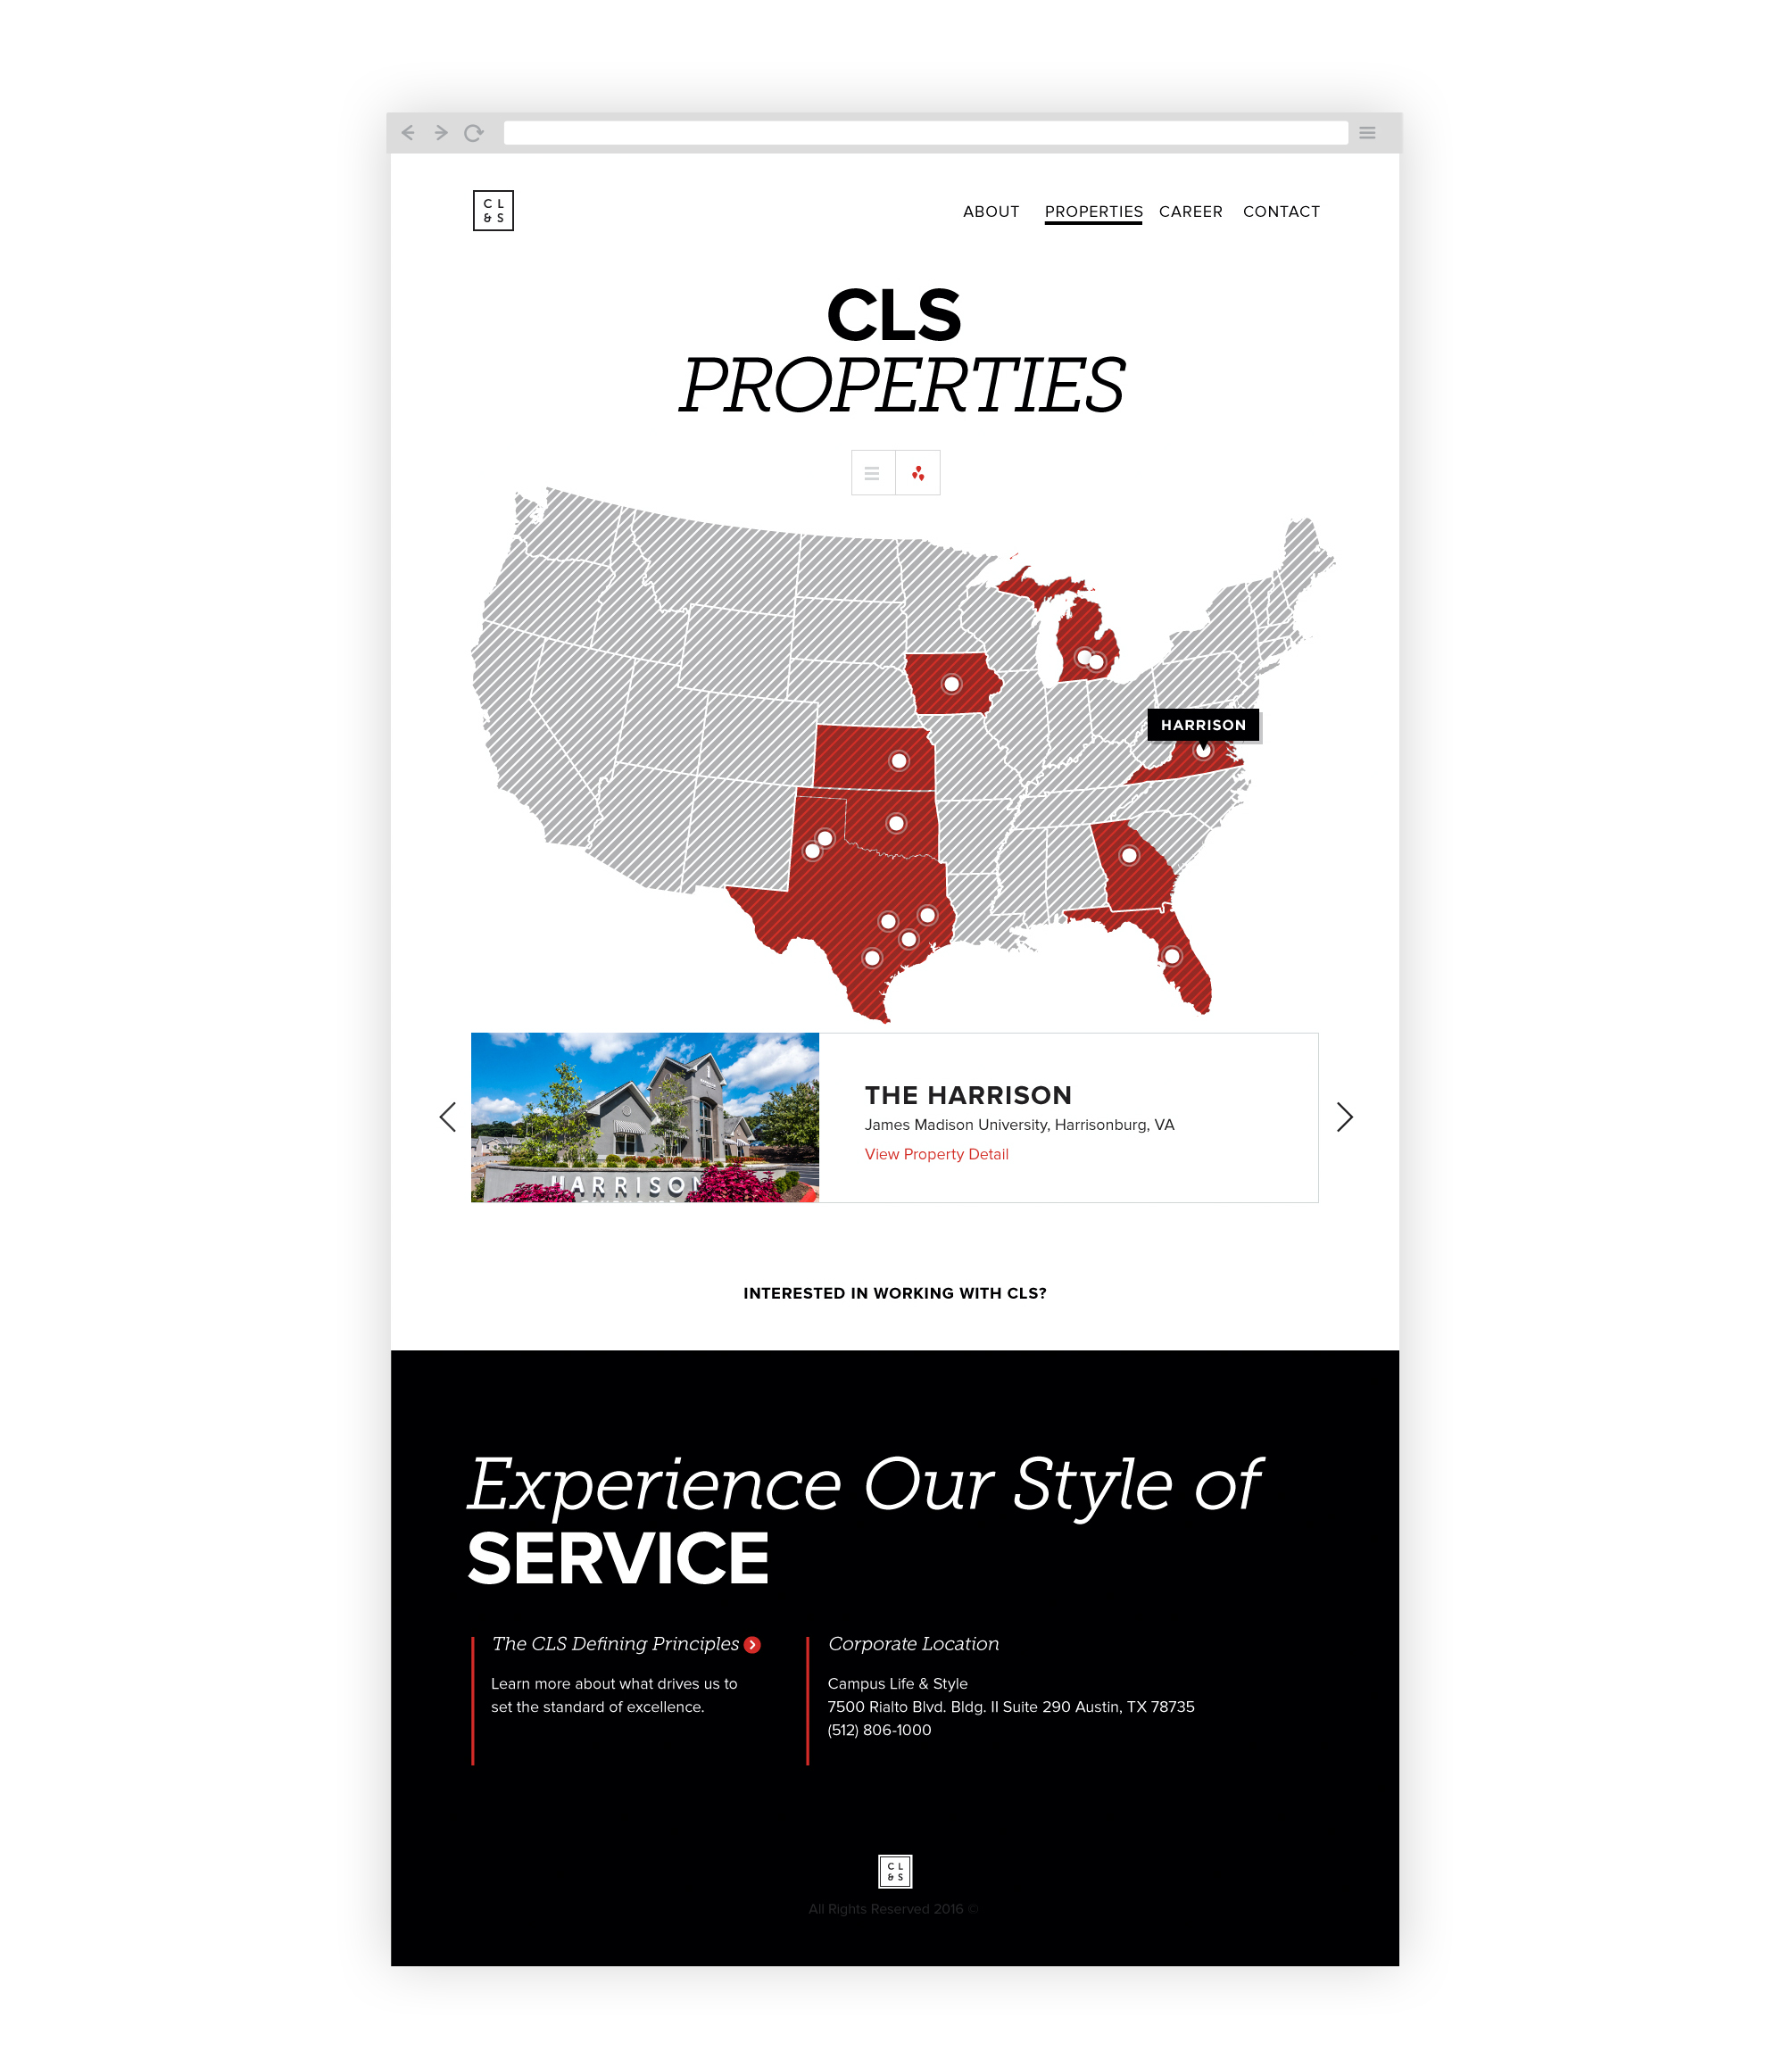 ABOUT CLS and  CLS Career page. 